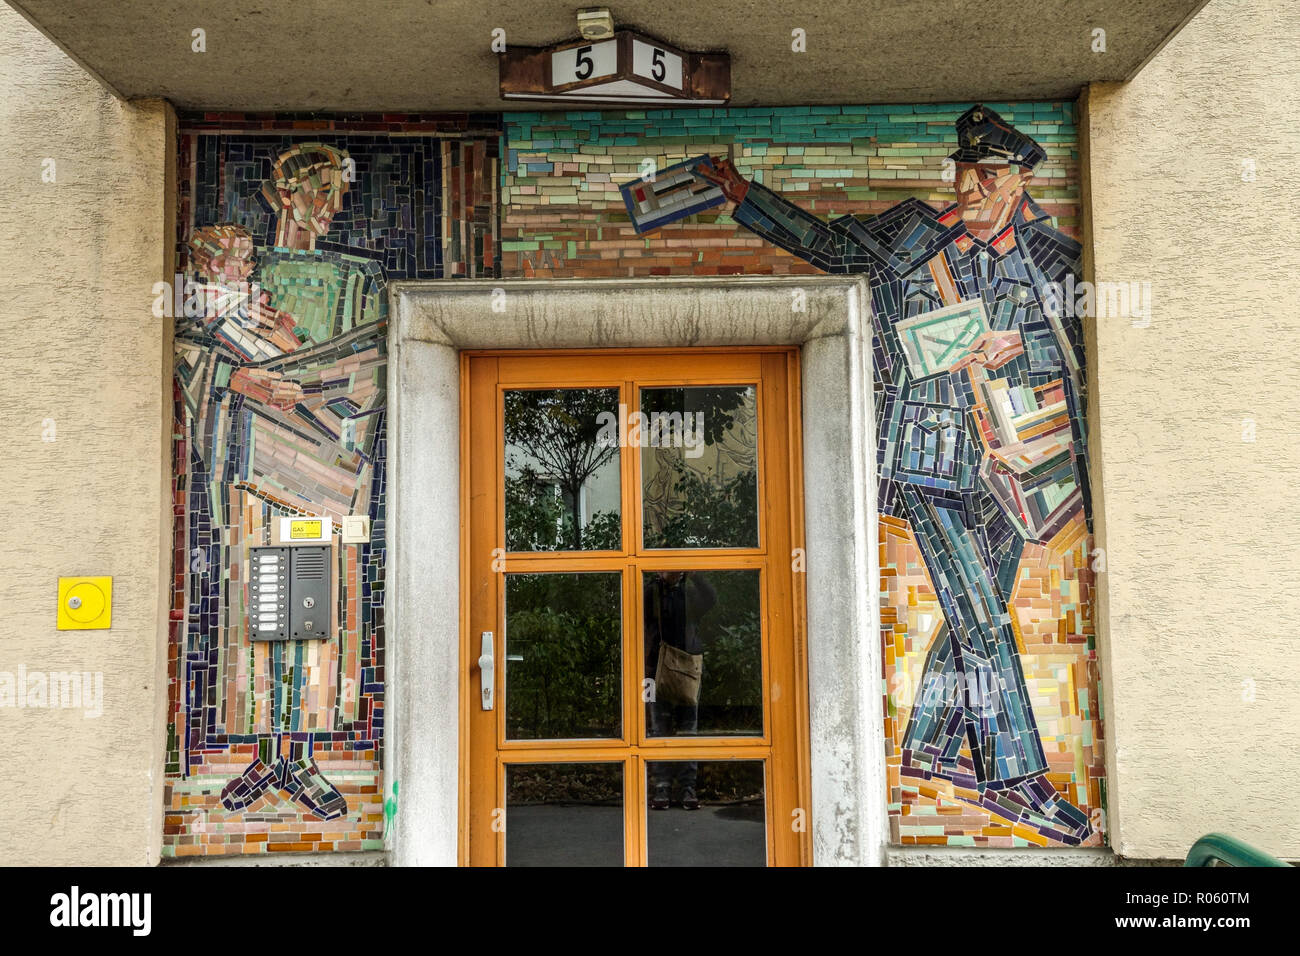 Vienna mosaic on a house built from the late fifties, Austria Vienna Heiligenstadt Stock Photo